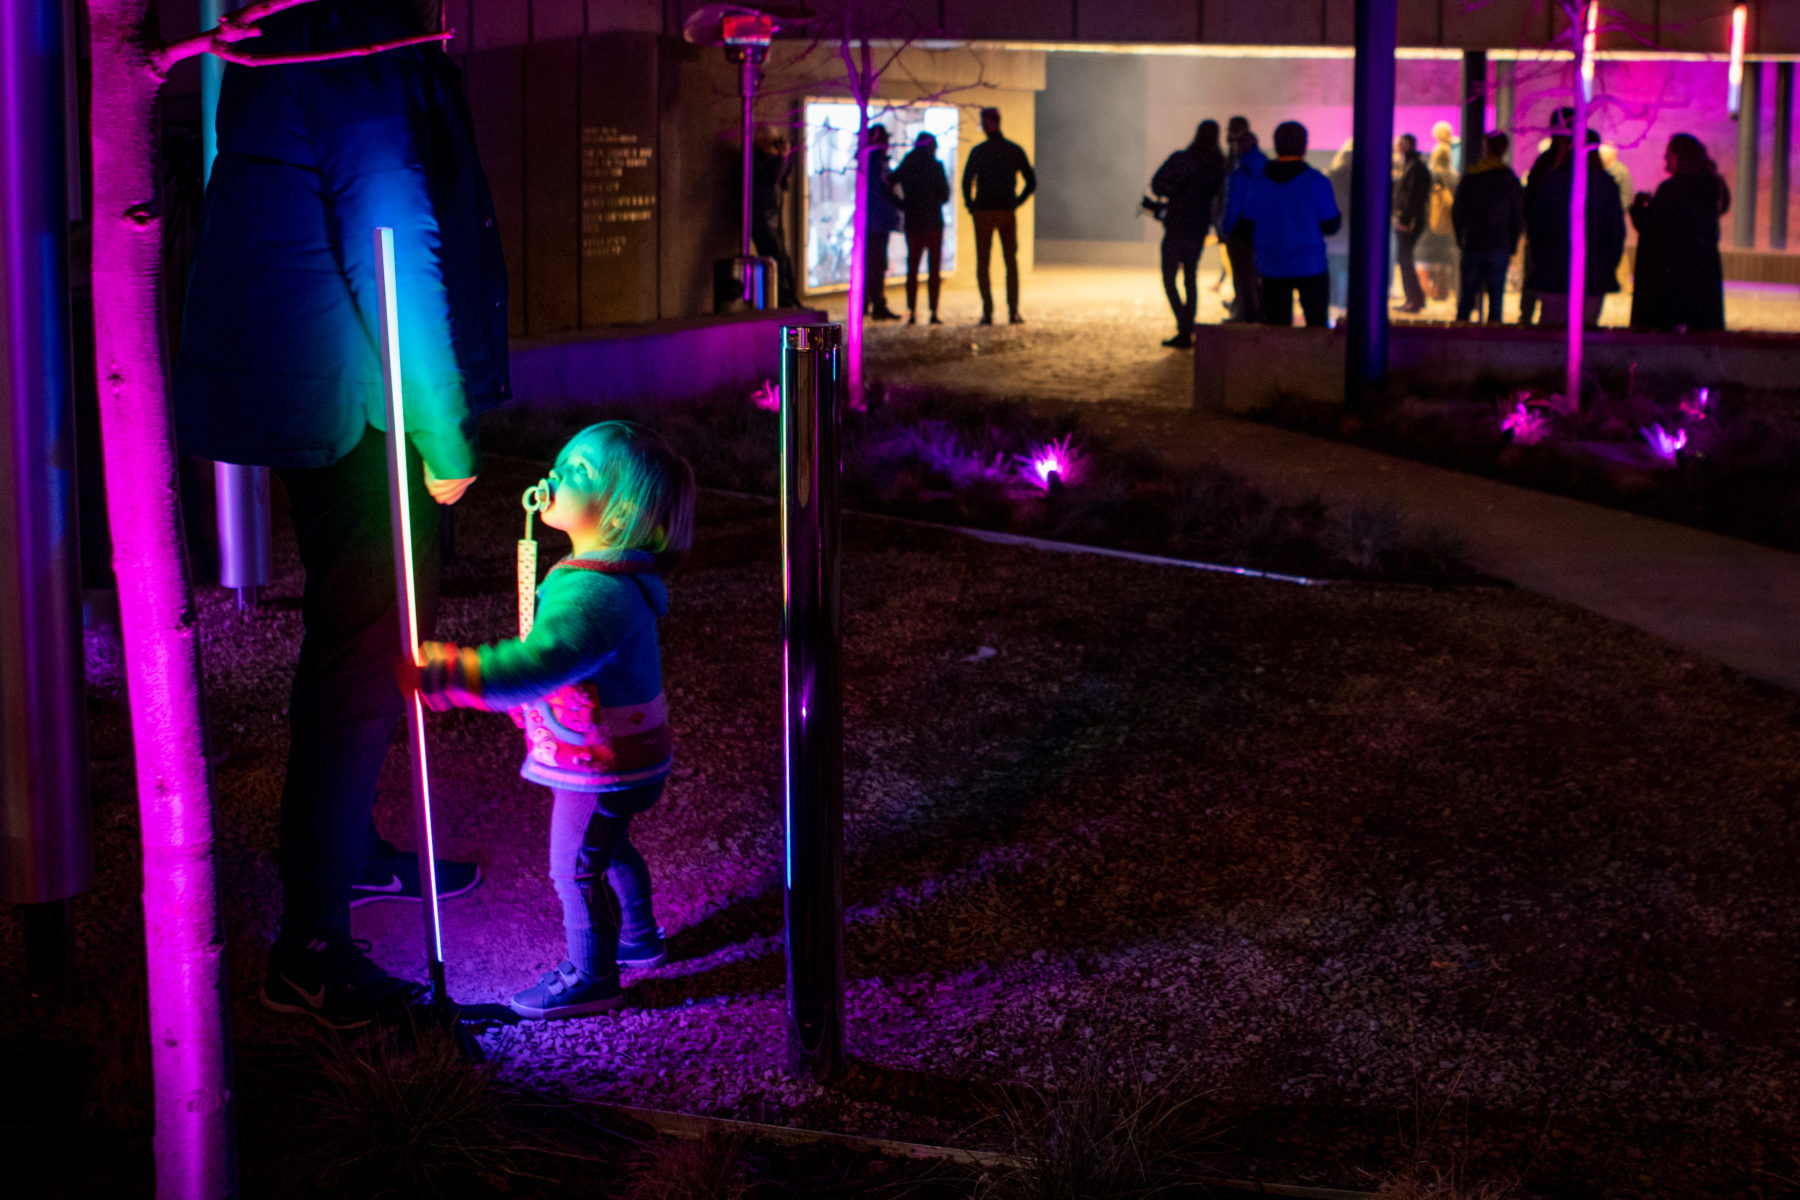 A toddler looks up at a pole installed in the plaza. The pole is illuminated and shines on the toddler's face